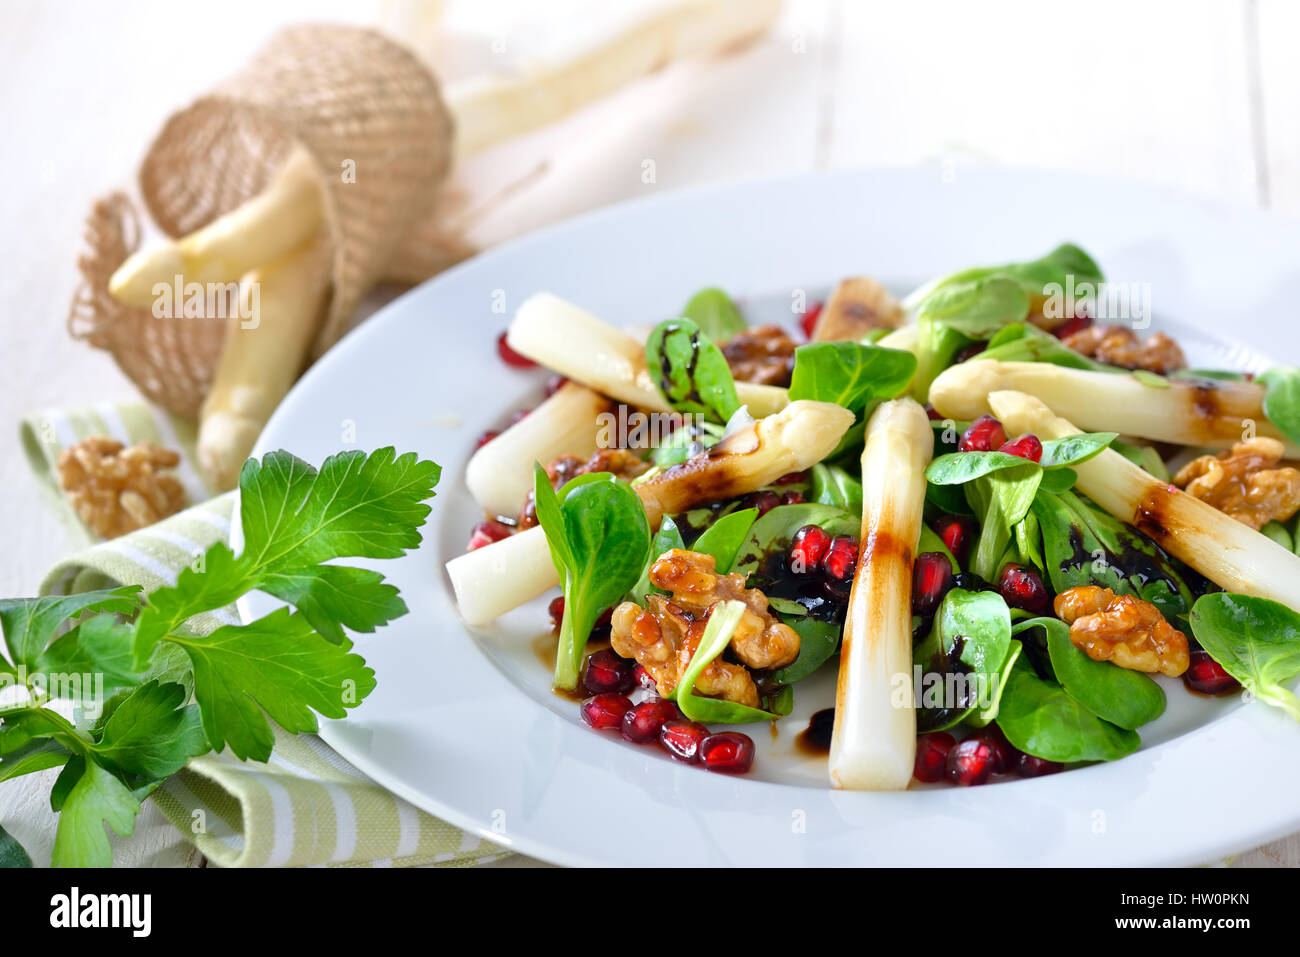 White asparagus on lamb's lettuce with candied walnuts, pomegranate seeds and balsamic vinegar Stock Photo